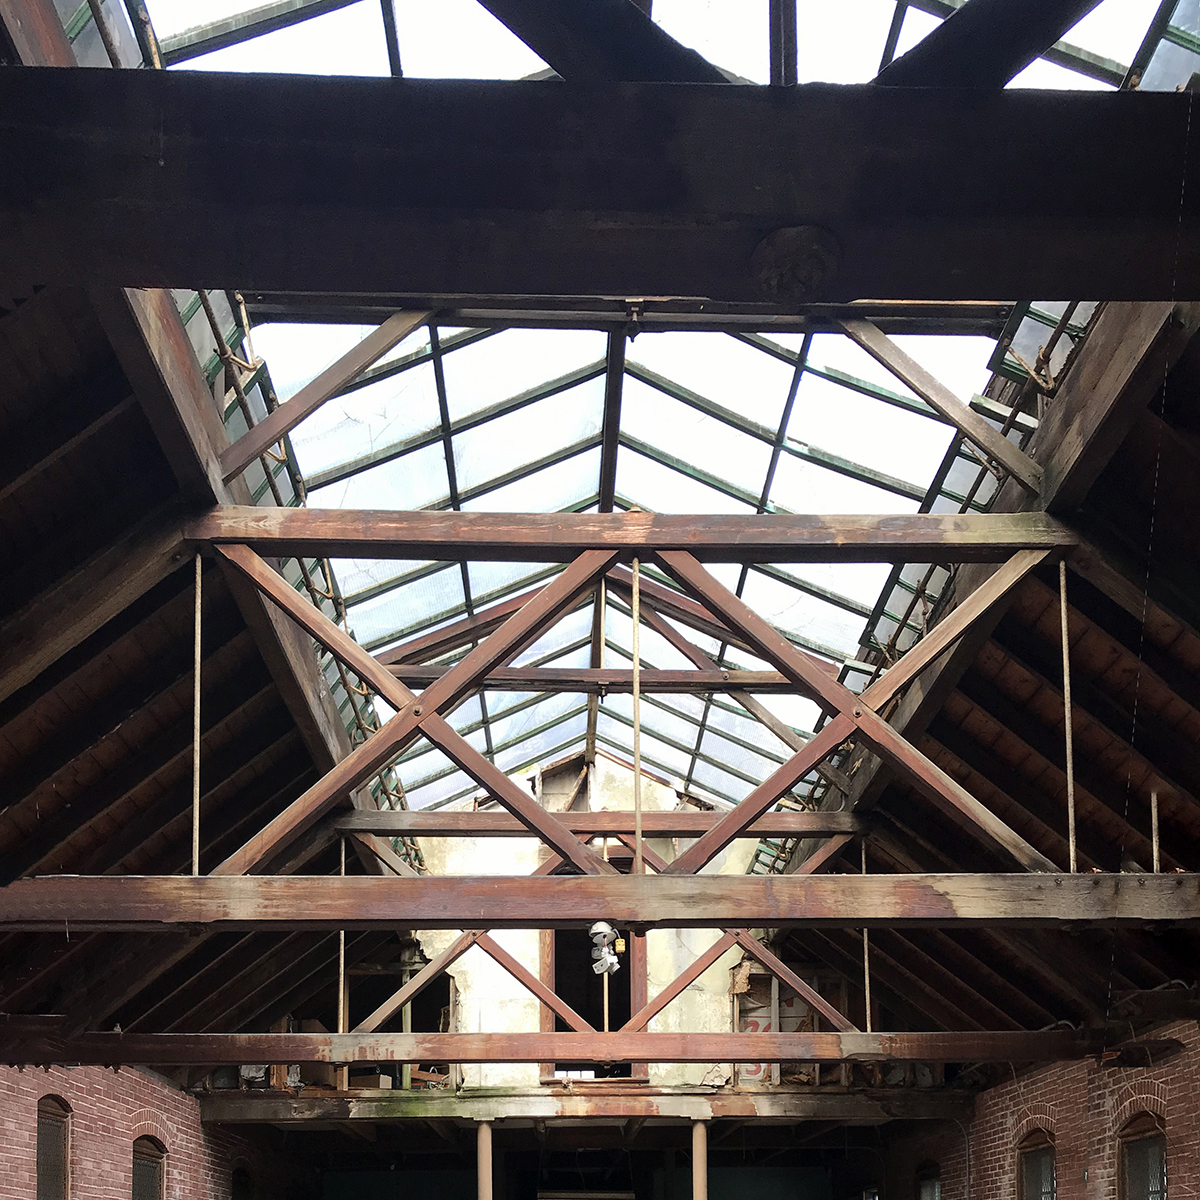 Interior of the carriage house and old skylight